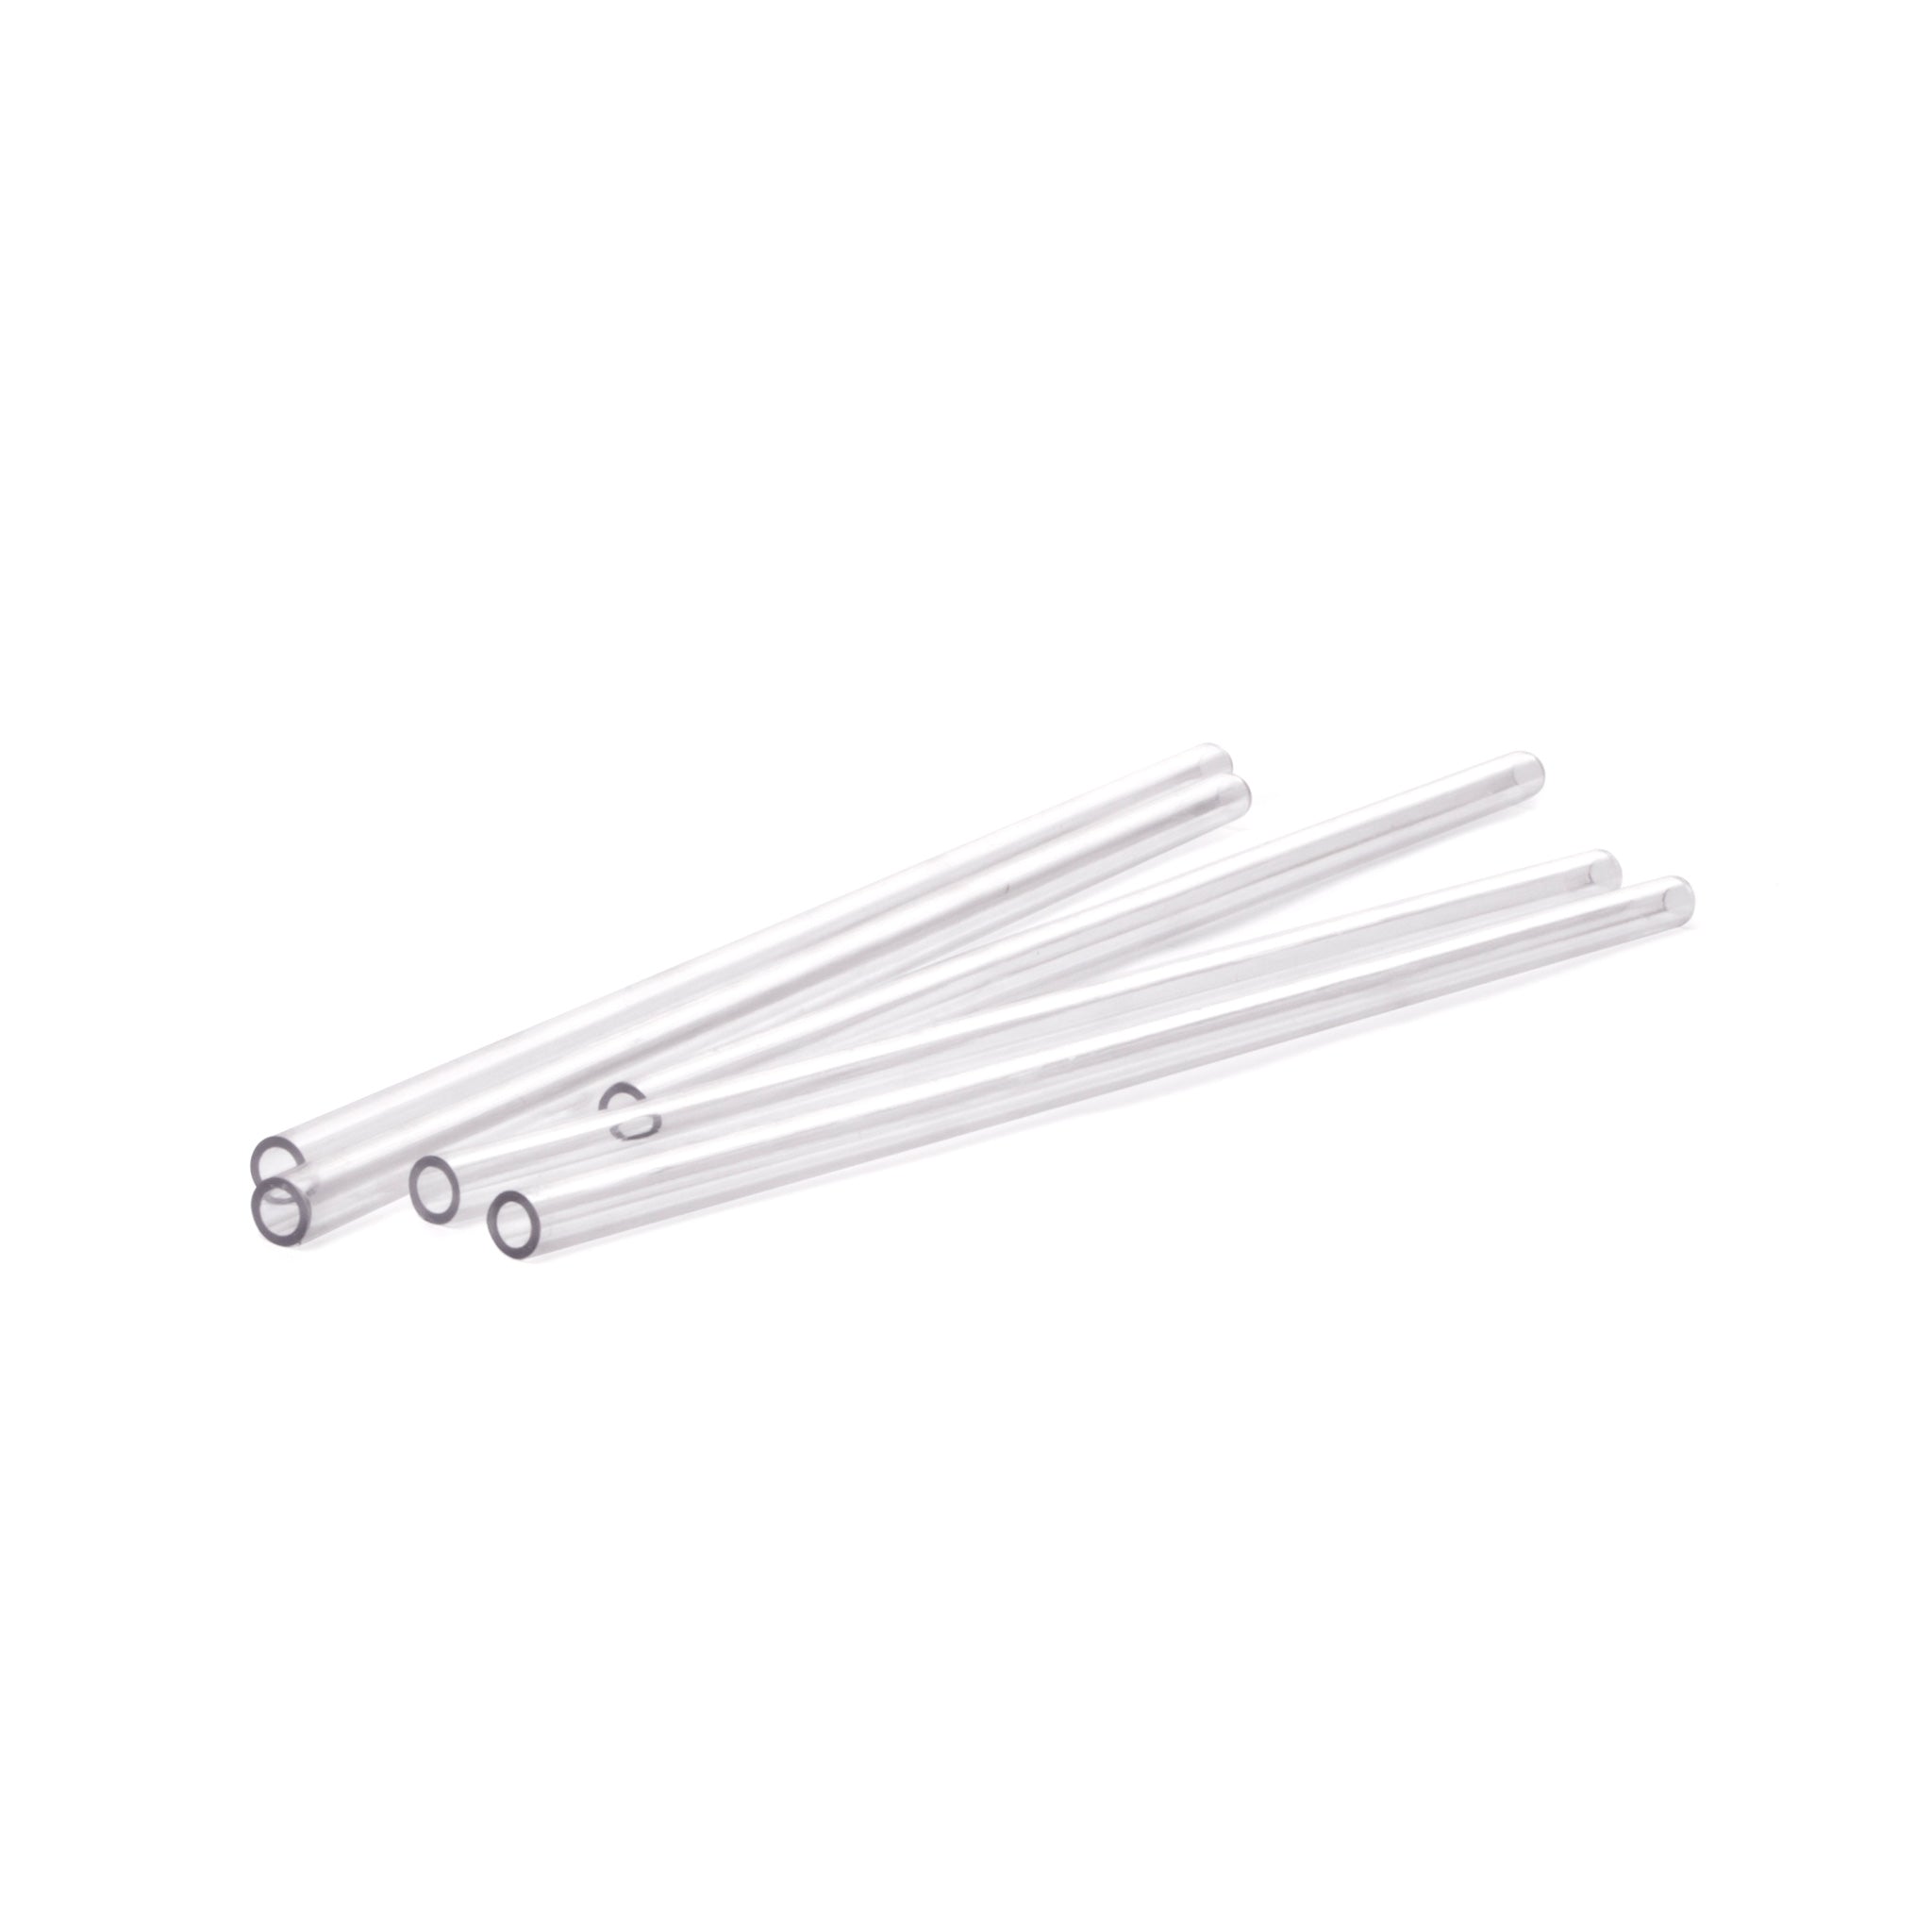 8 INCH COLLINS STRAWS - CASE OF 10 / 500 PACKS – BulkBarProducts